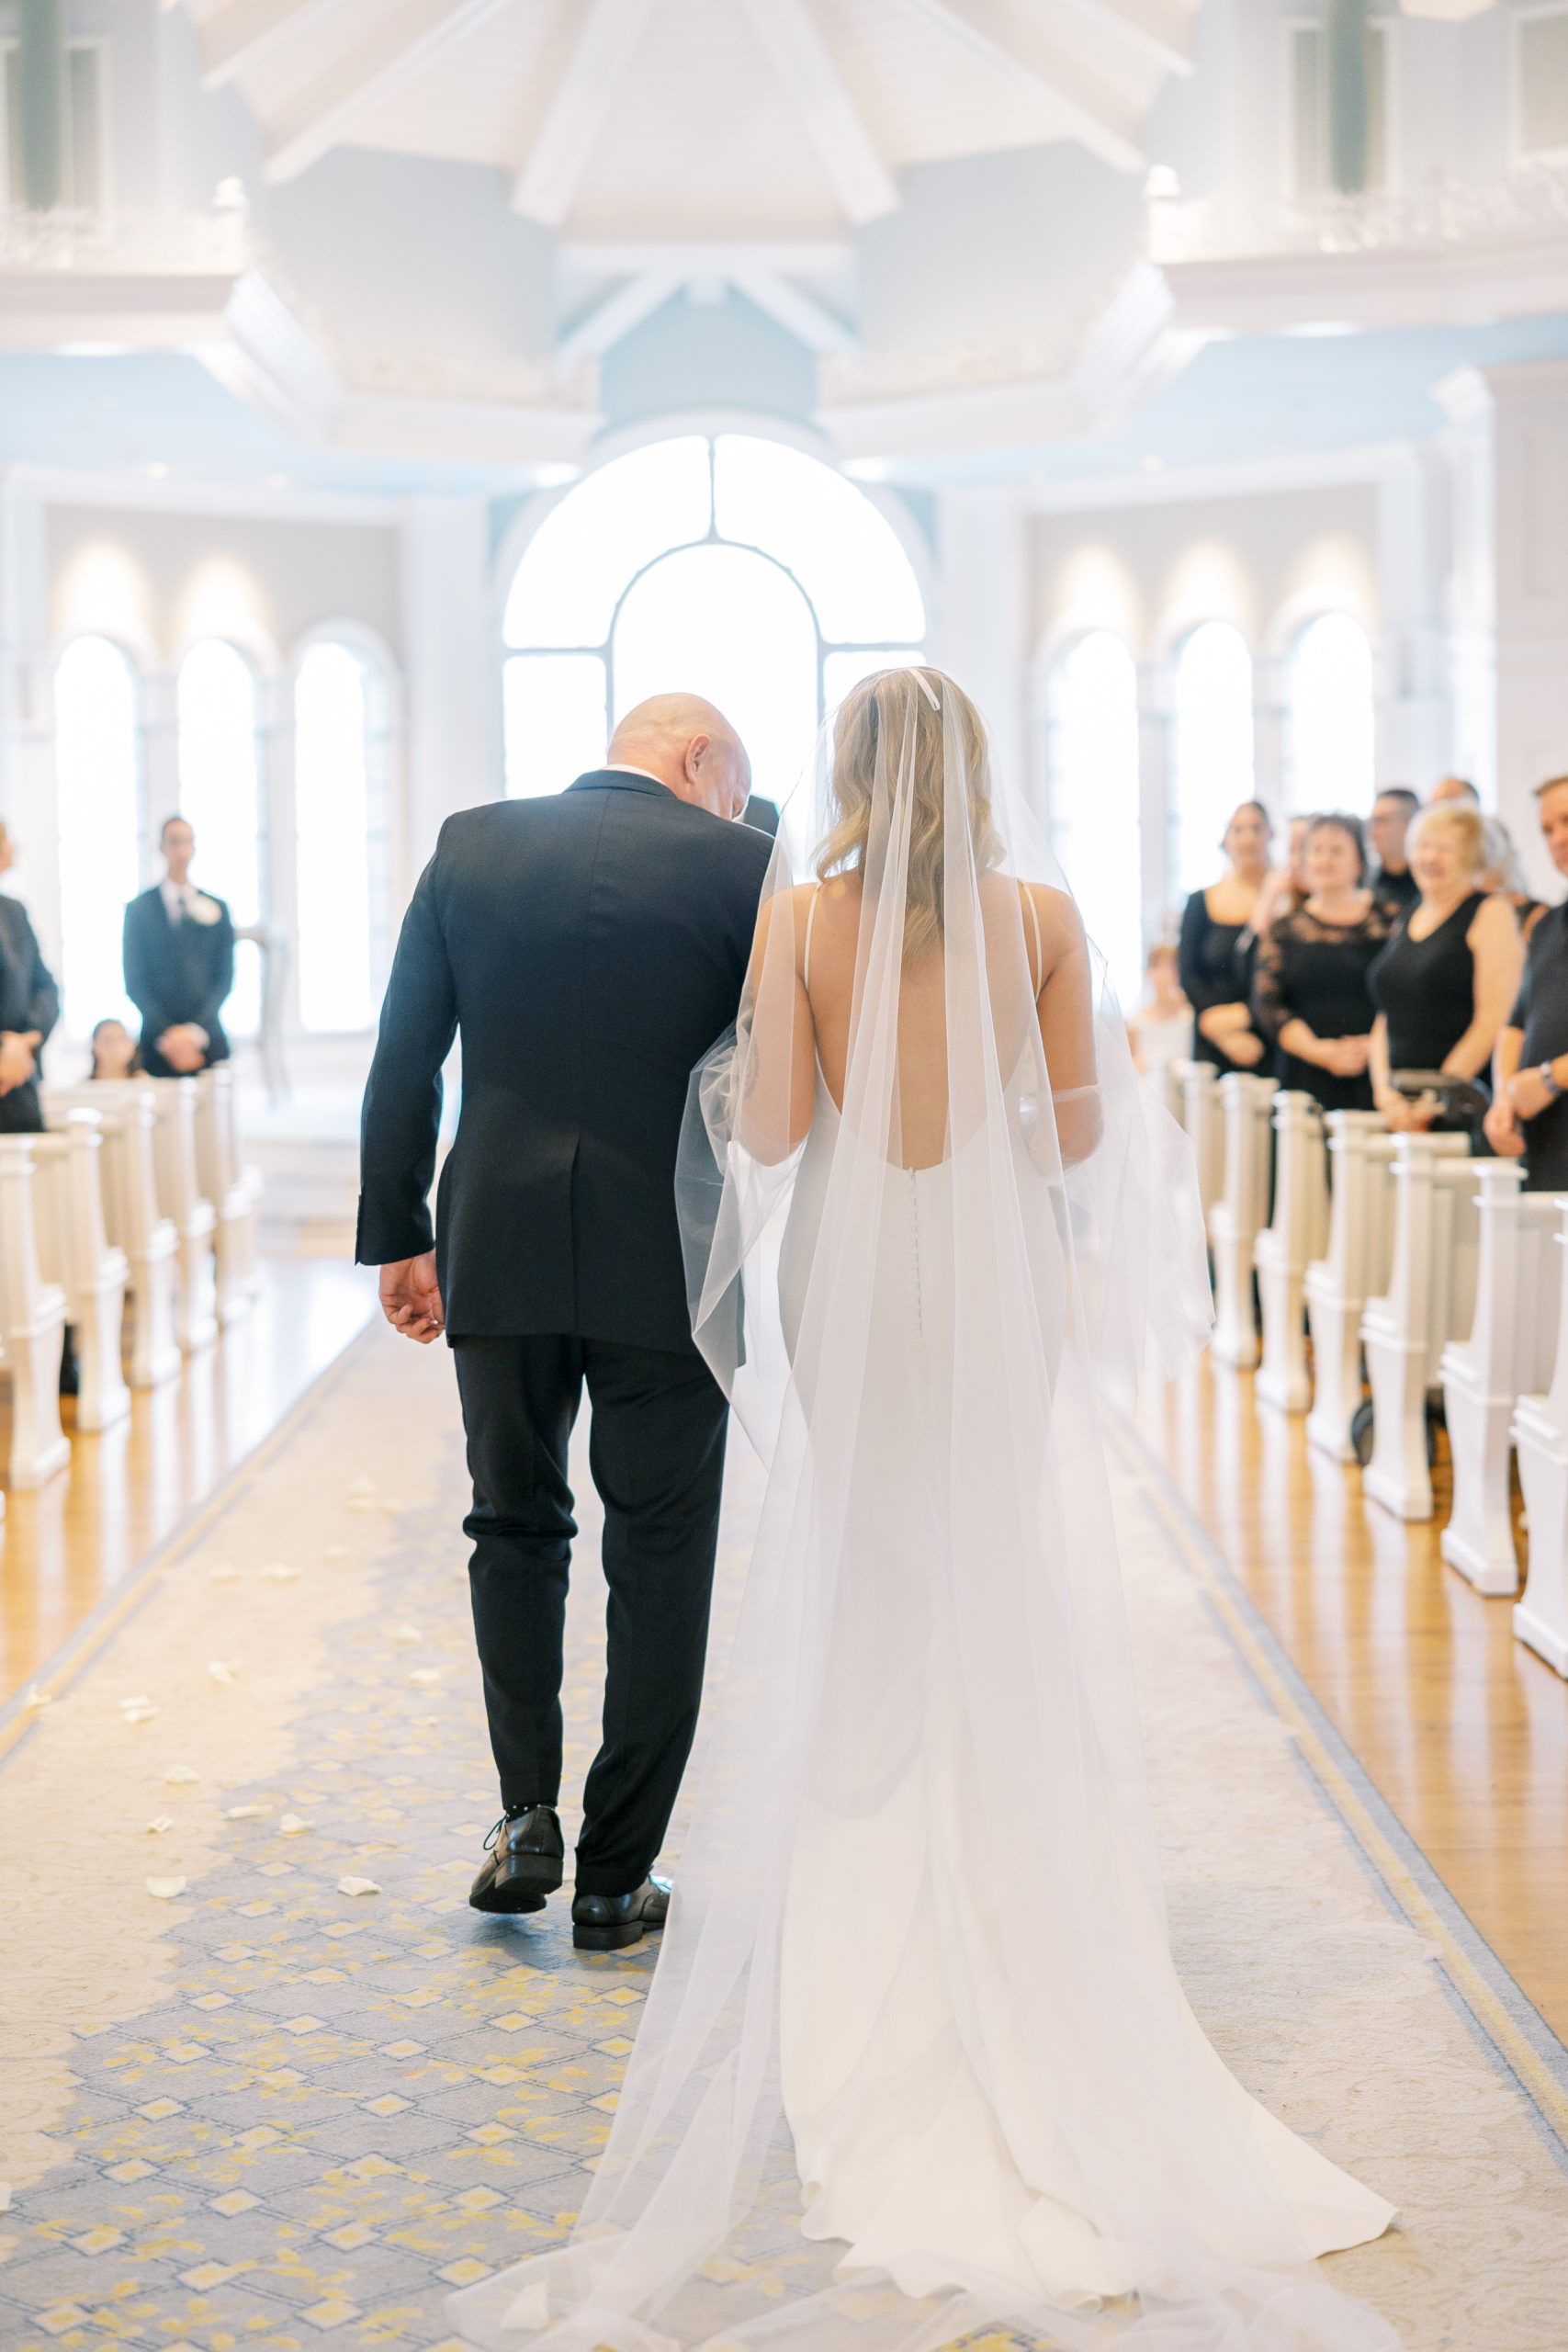 Father of the bride walks daughter down the aisle in white and blue wedding pavilion for Disney Film Wedding Photographer